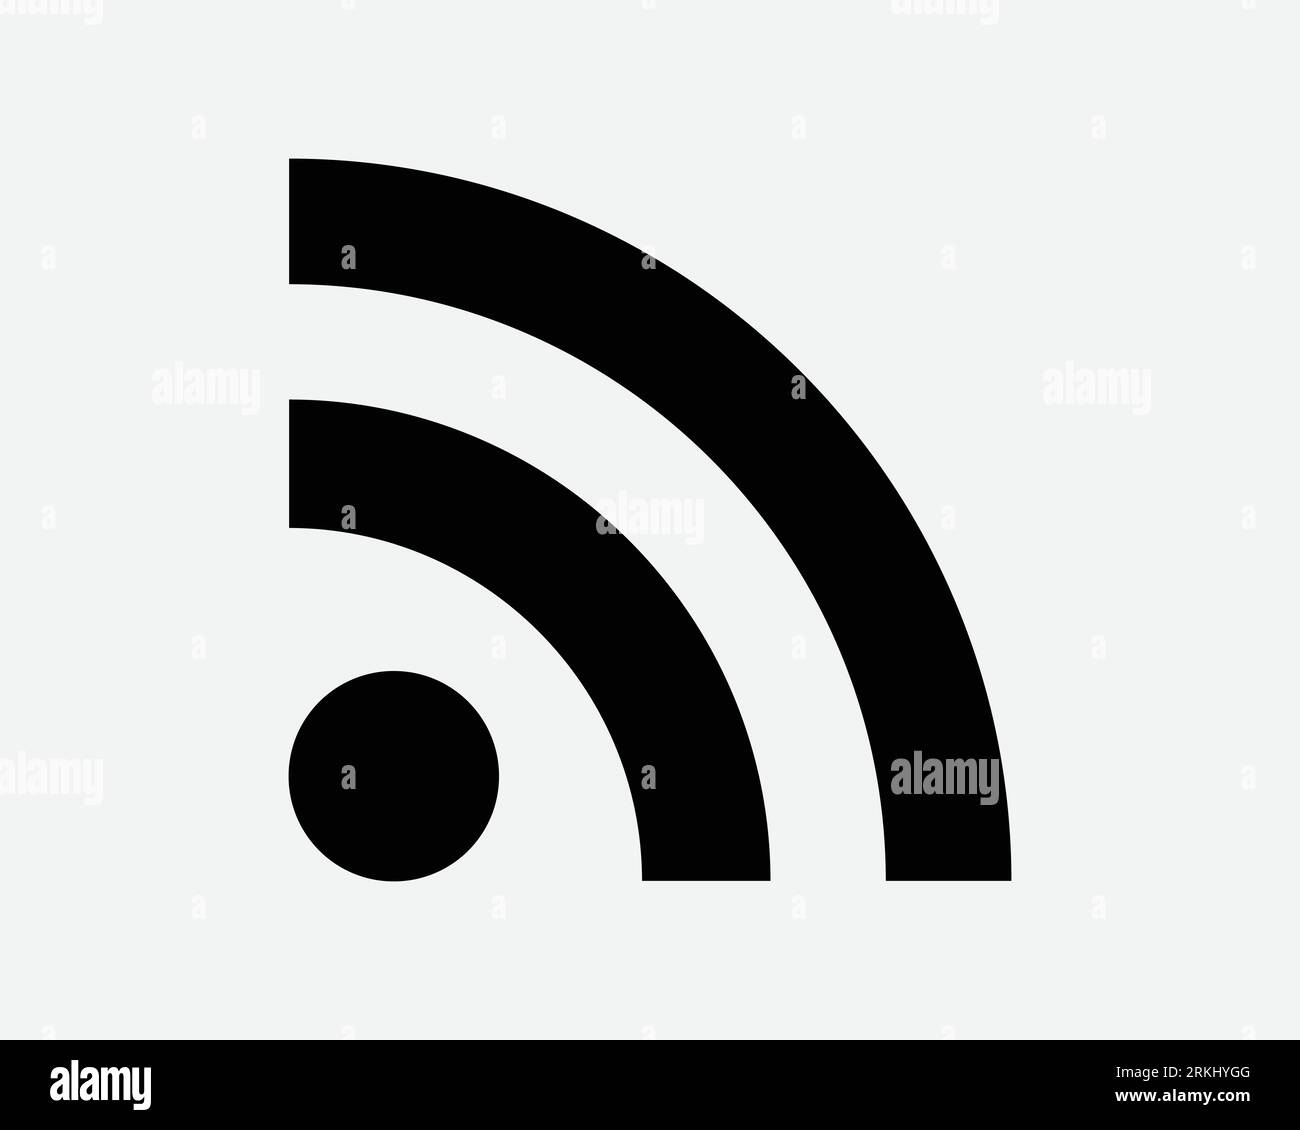 RSS Icon News Message Broadcast Email Newsletter Web Website Communication Network Wireless Signal Data Podcast Blog Black Shape Vector Symbol Sign Stock Vector